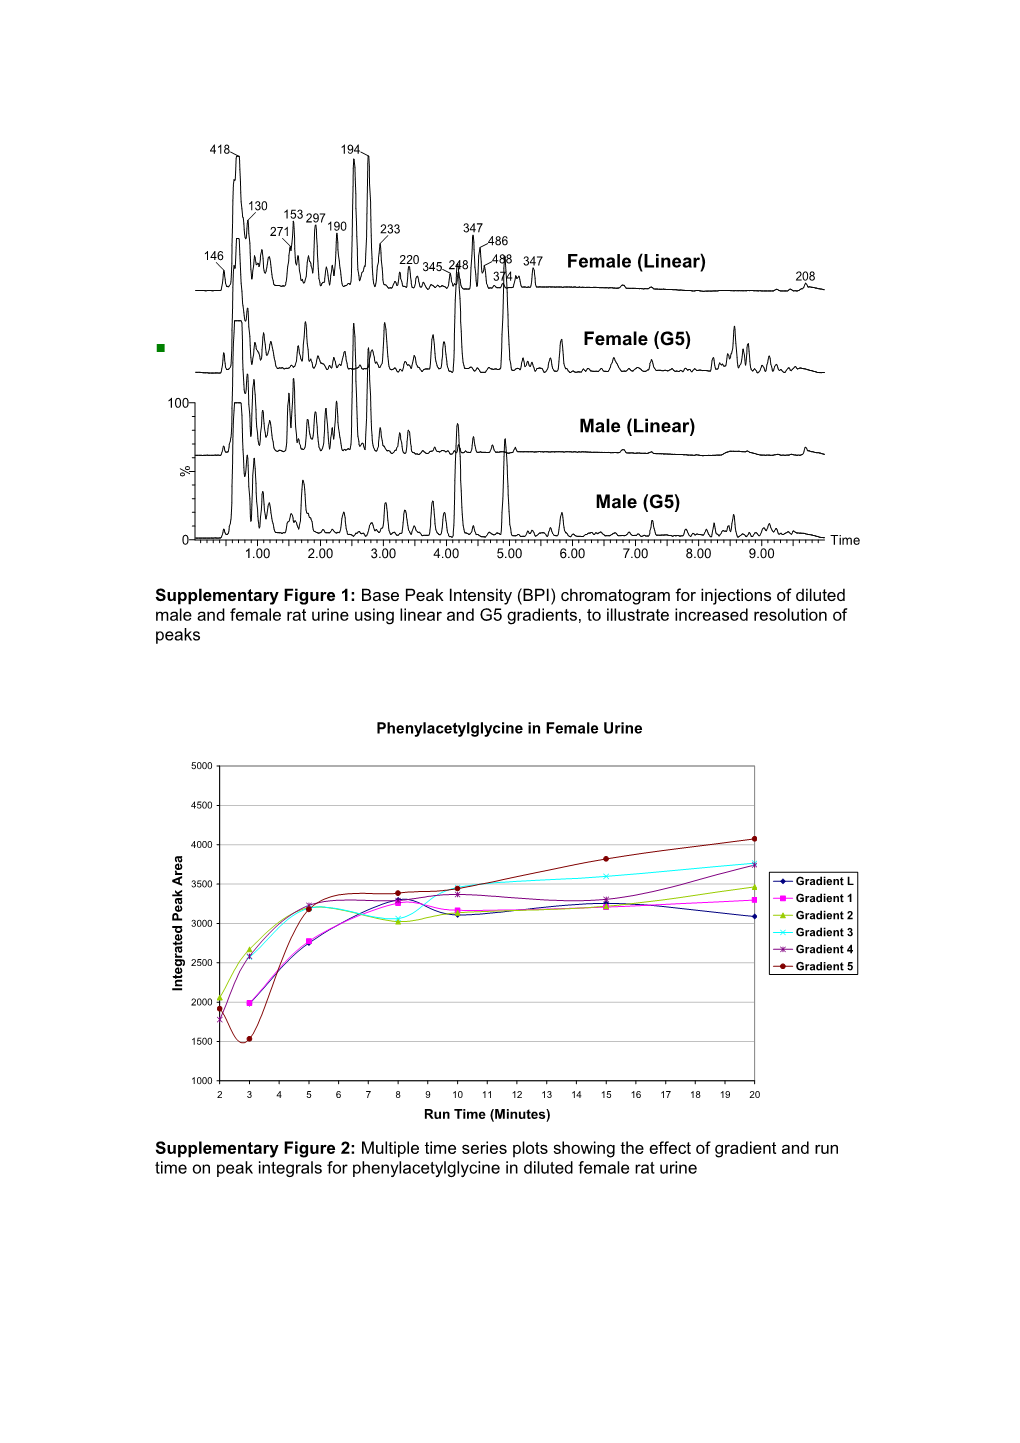 Supplementary Figure 1: Base Peak Intensity (BPI) Chromatogram for Injections of Diluted